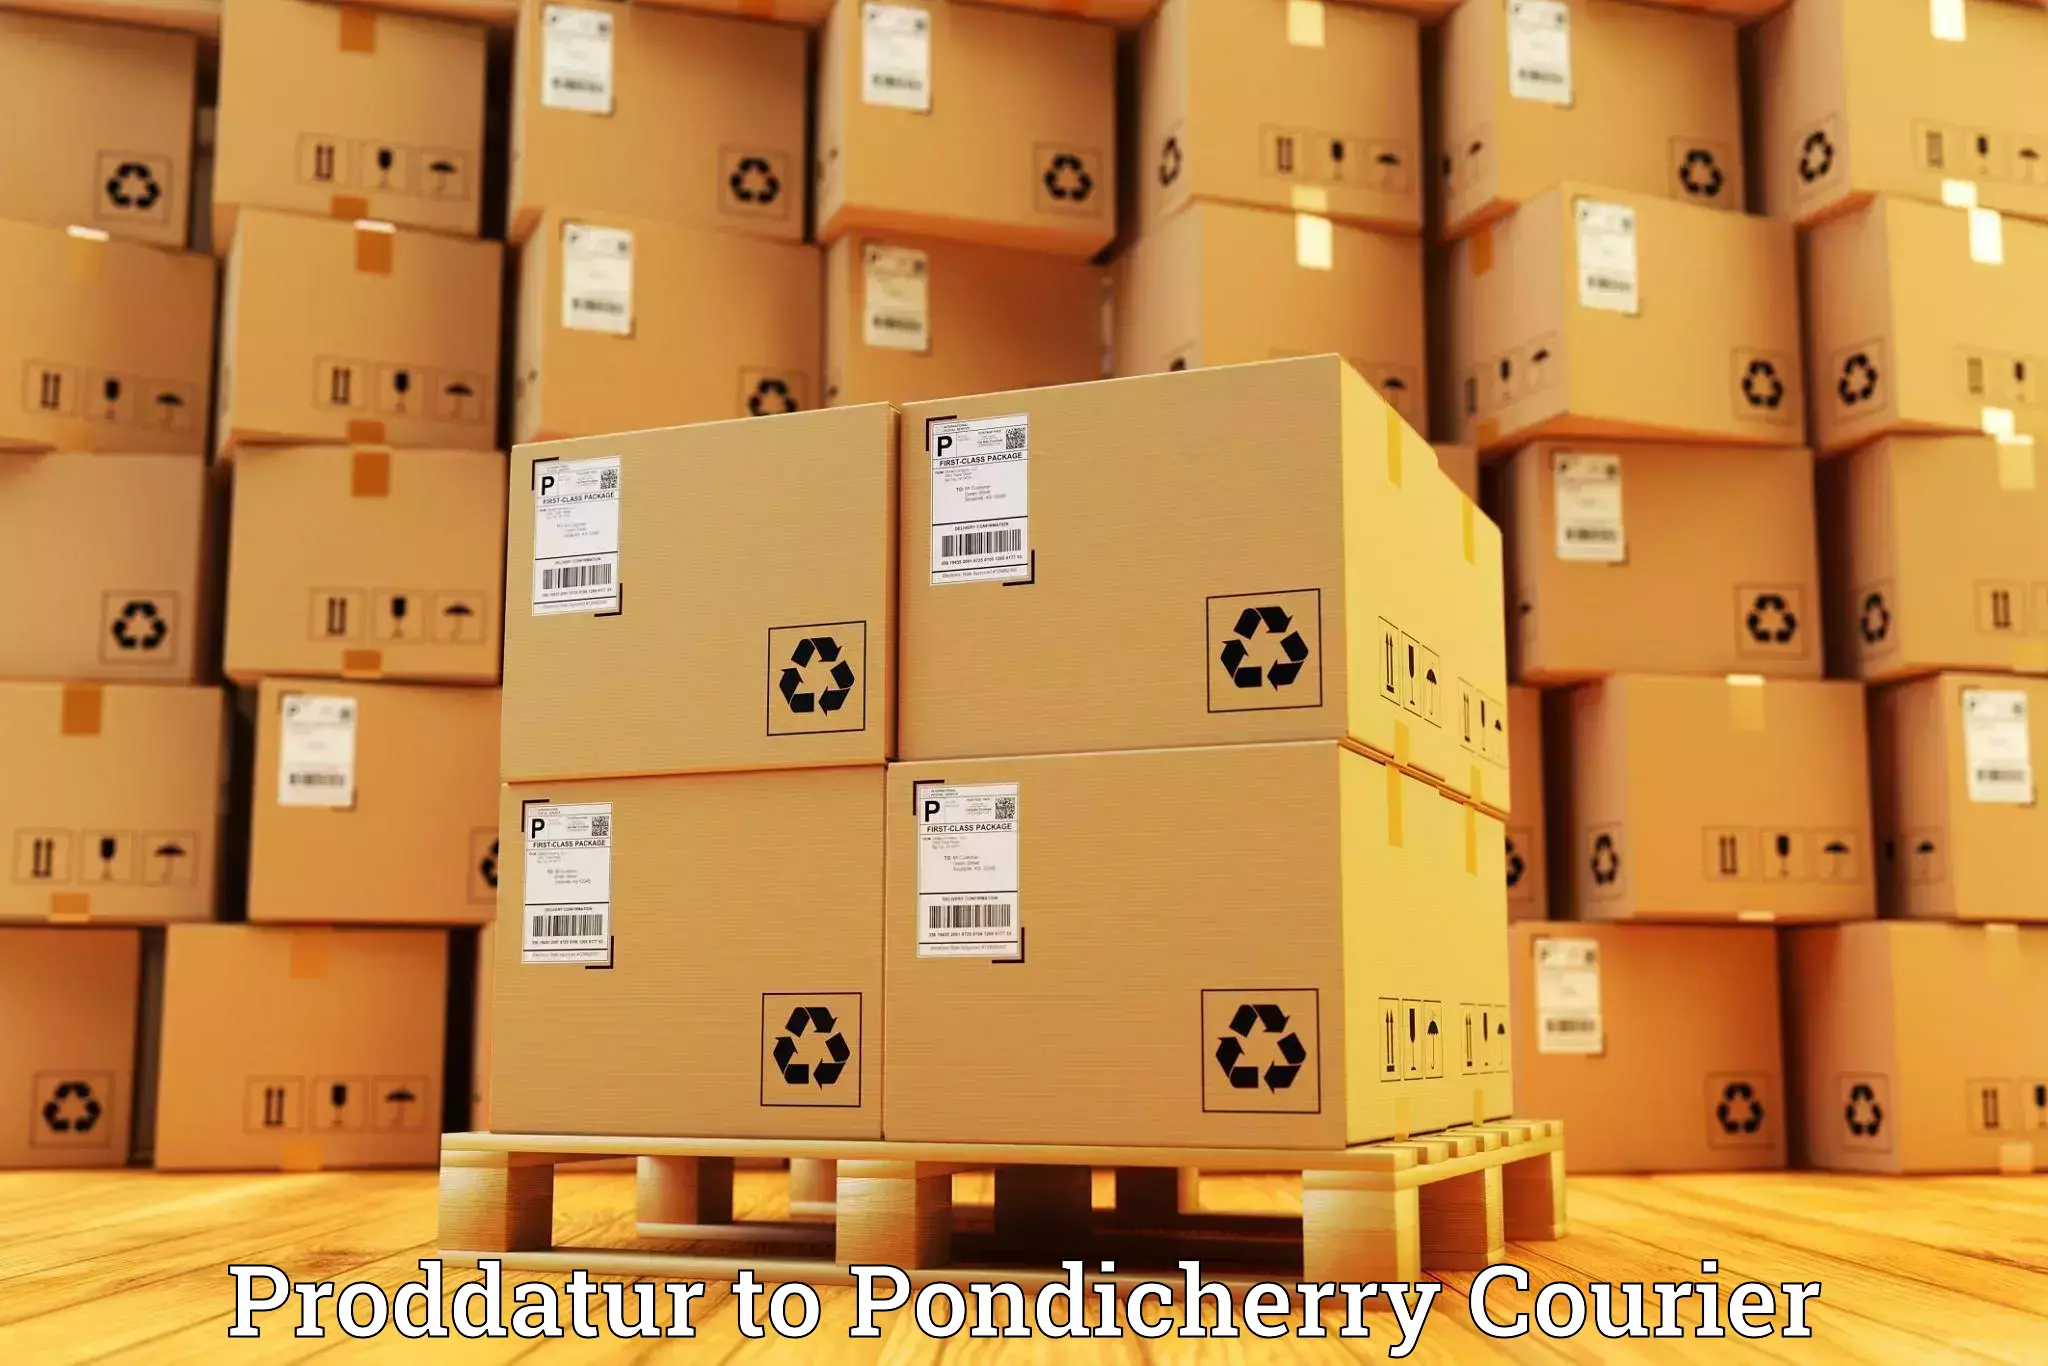 Online luggage shipping booking Proddatur to Pondicherry